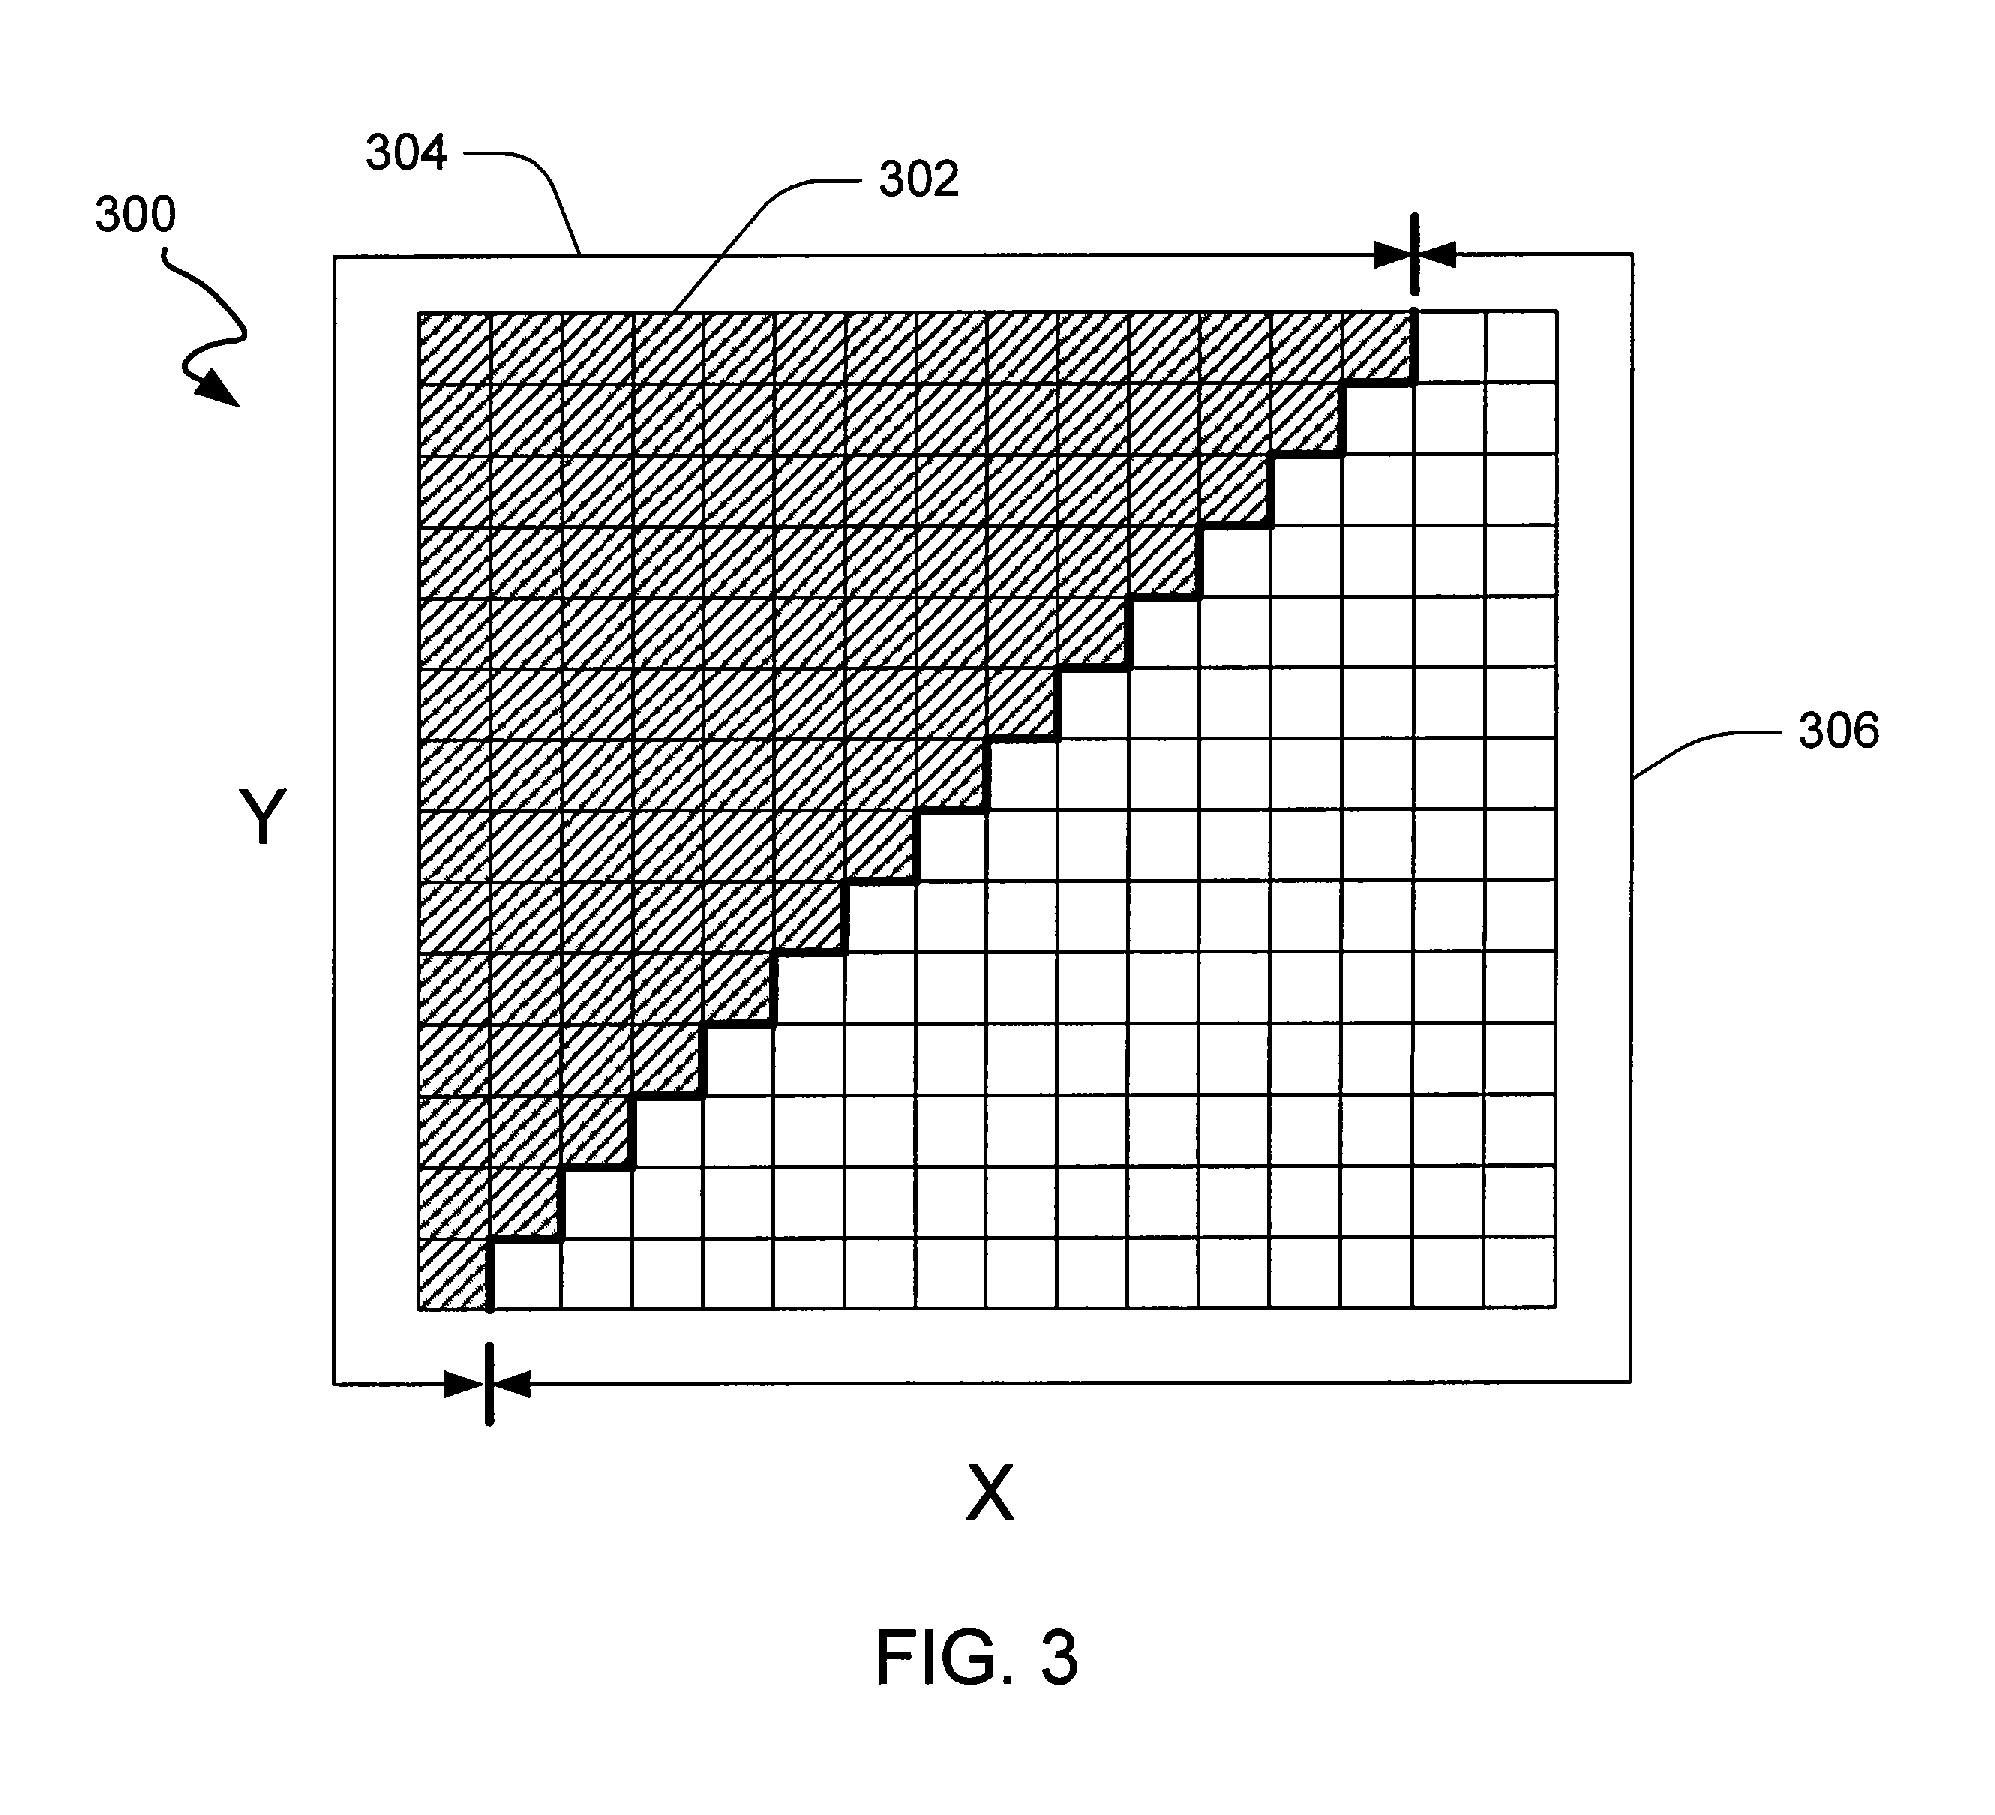 Conformal rolling buffer apparatus, systems, and methods